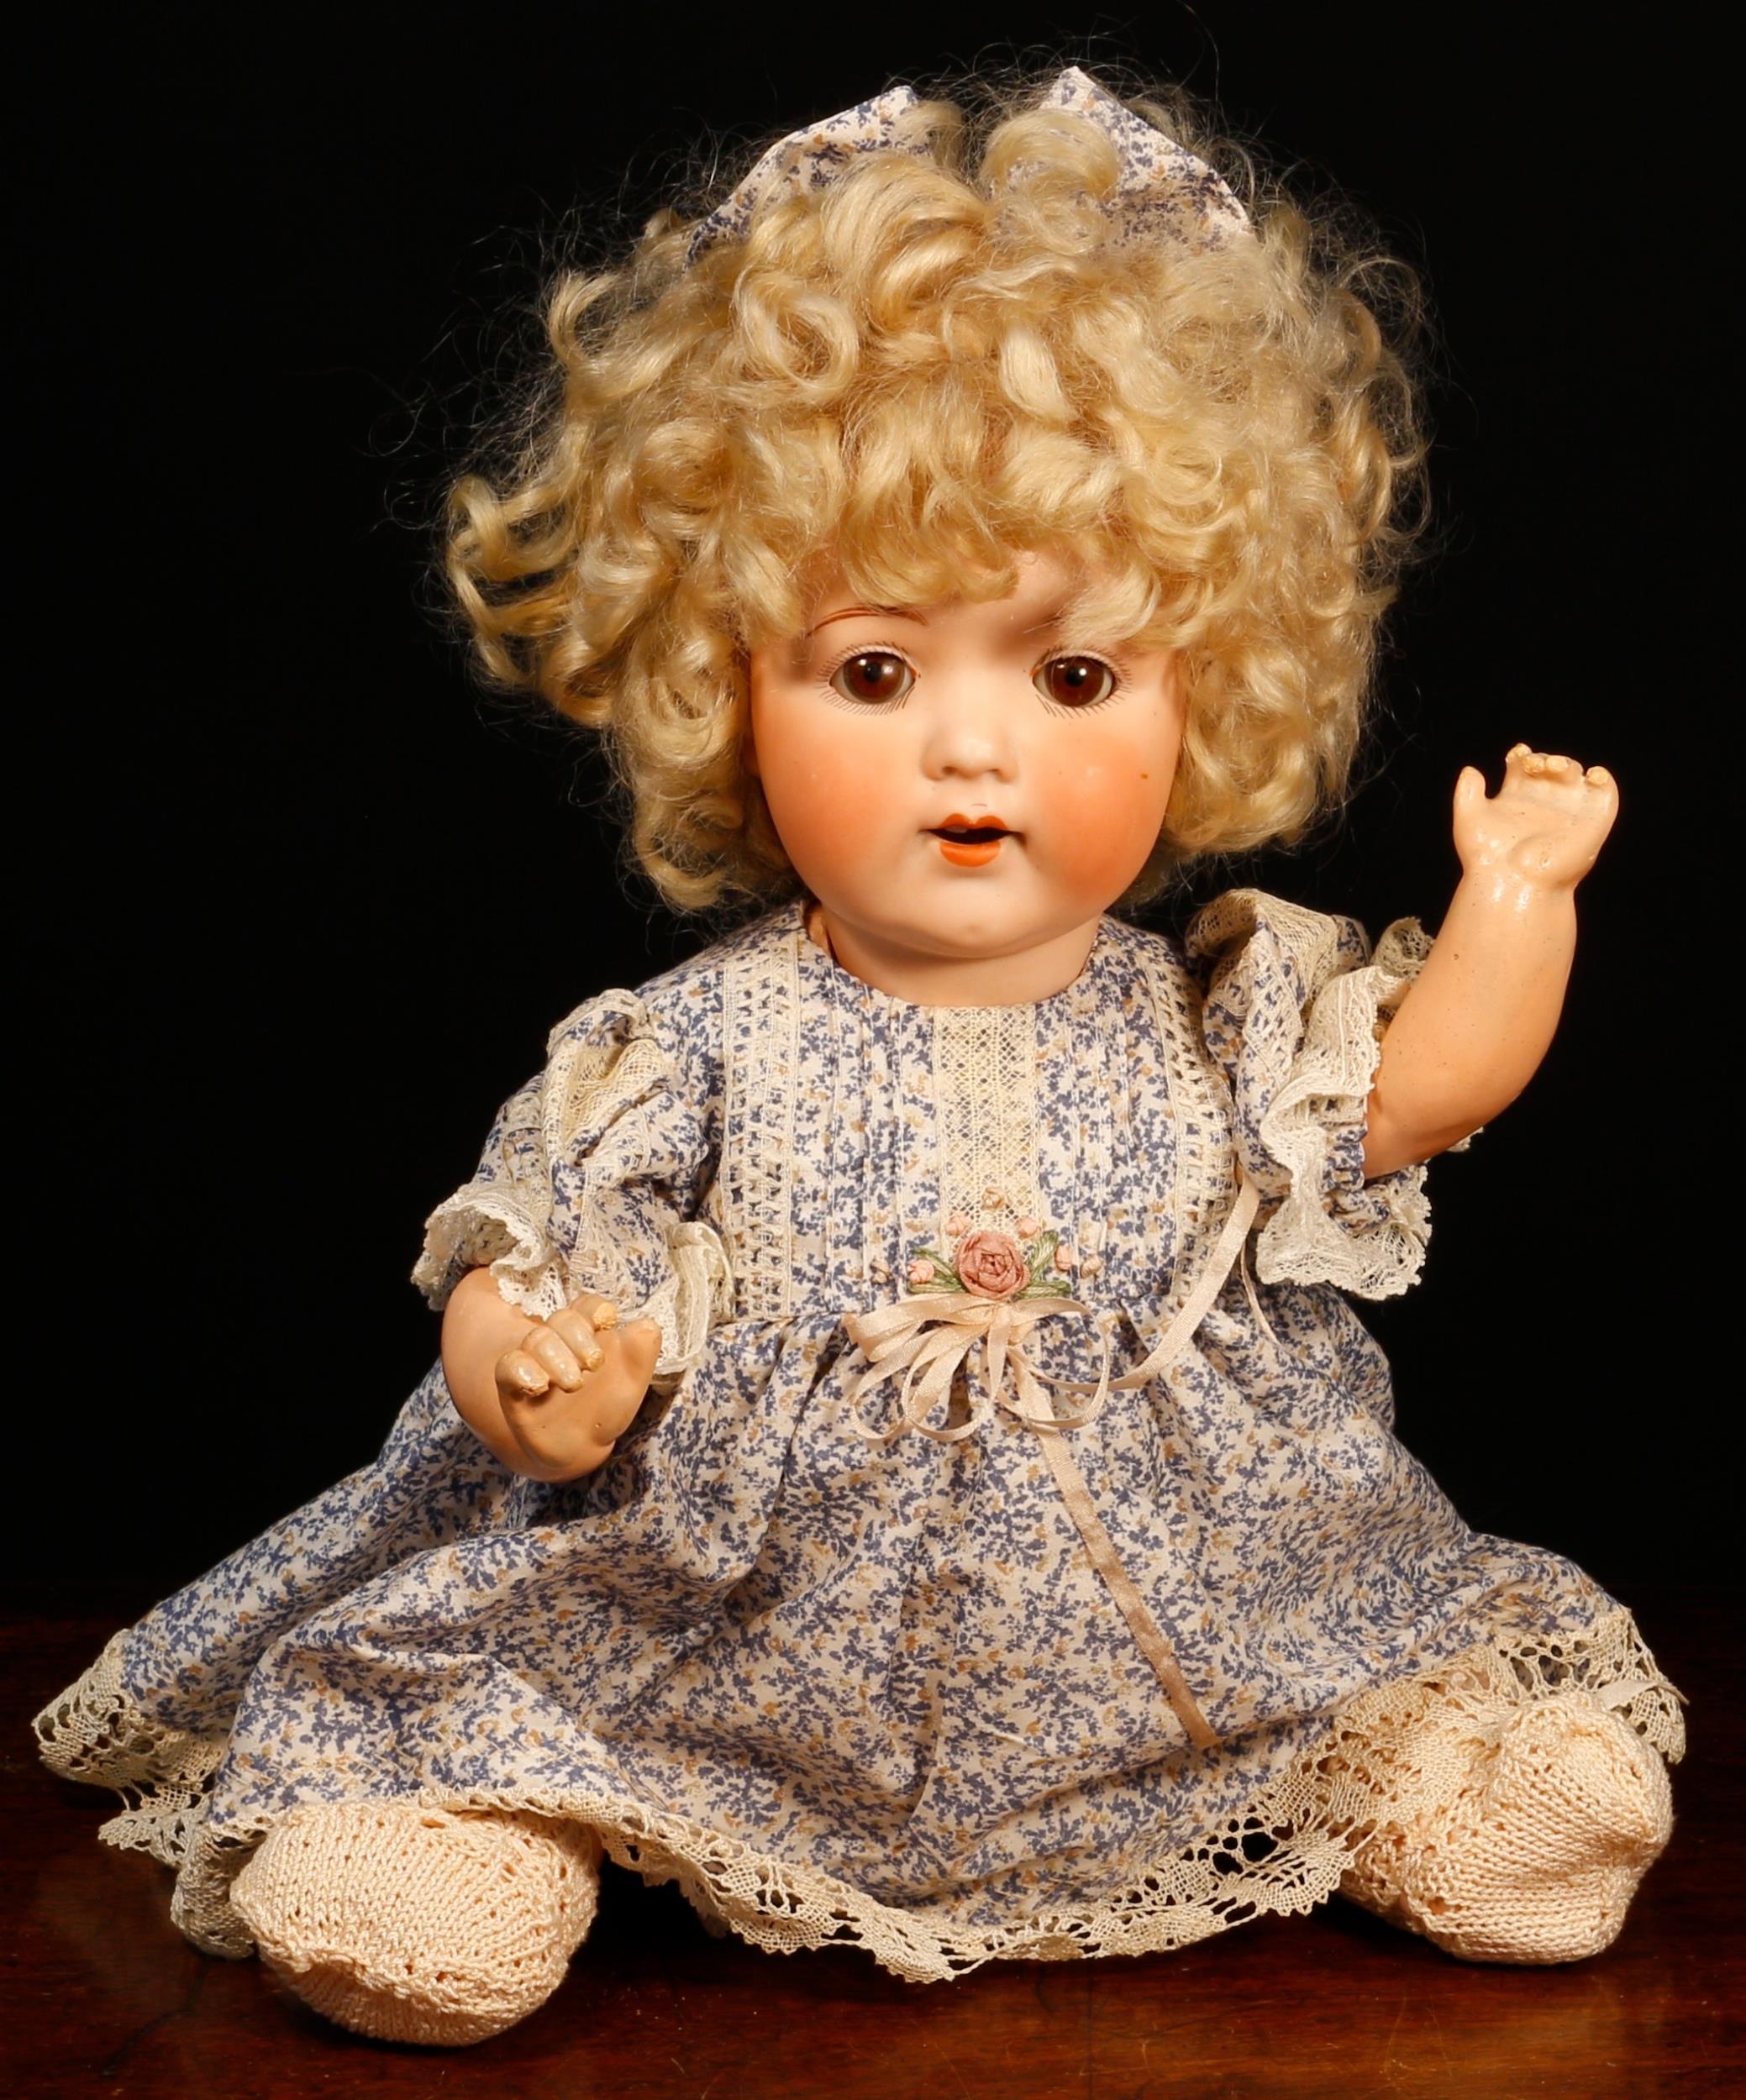 An Armand Marseille (Germany) bisque head and painted composition bodied doll, the bisque head inset